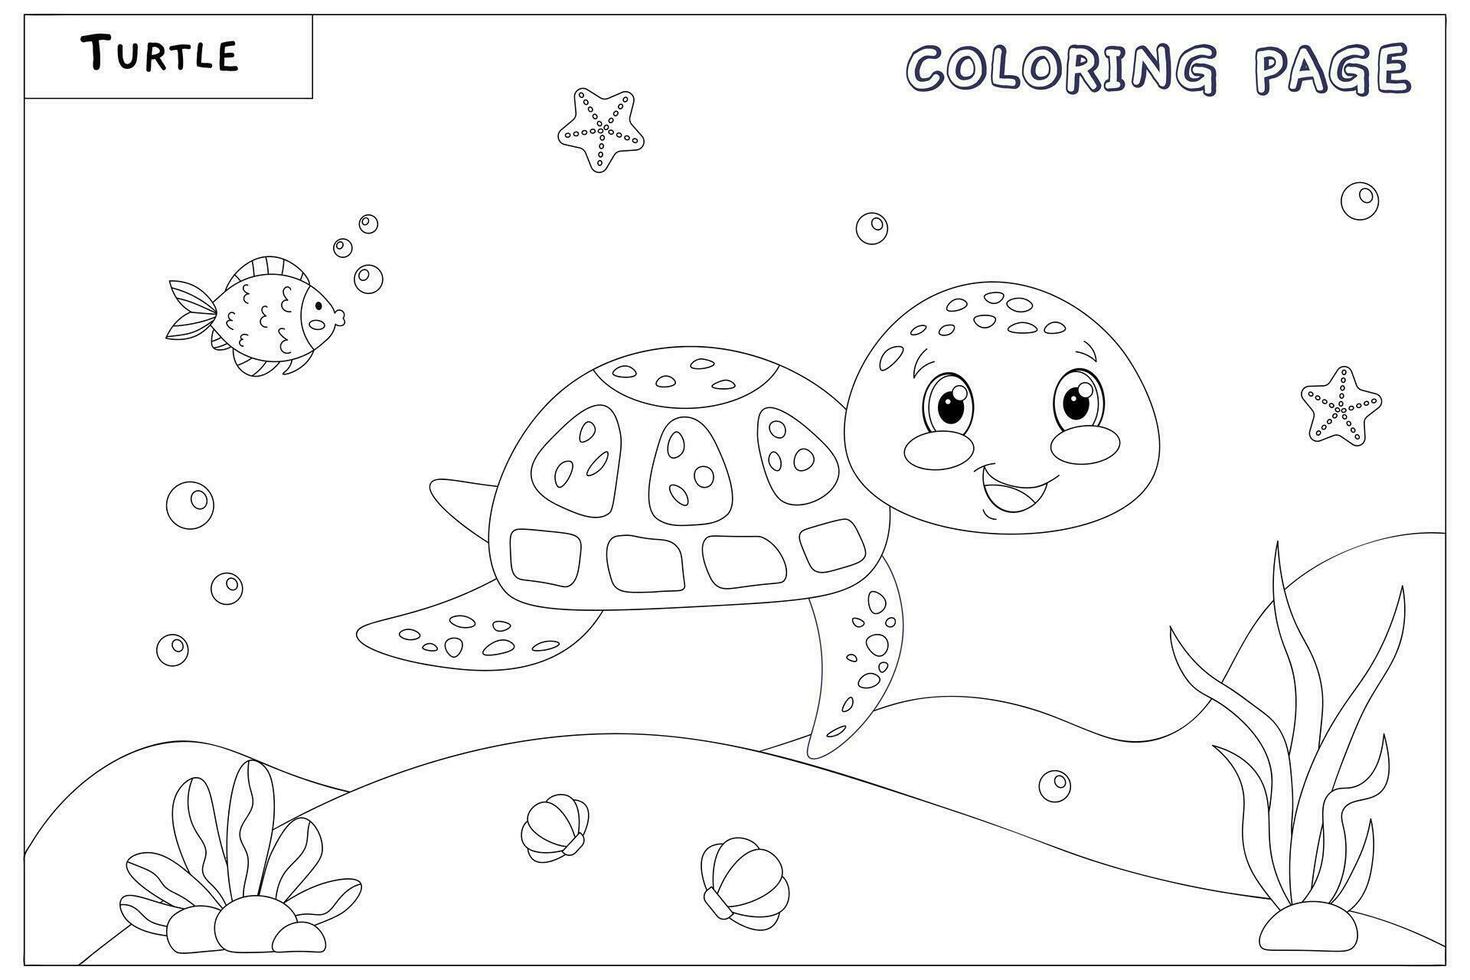 Cute smiling turtle, with drawn elements in black and white vector